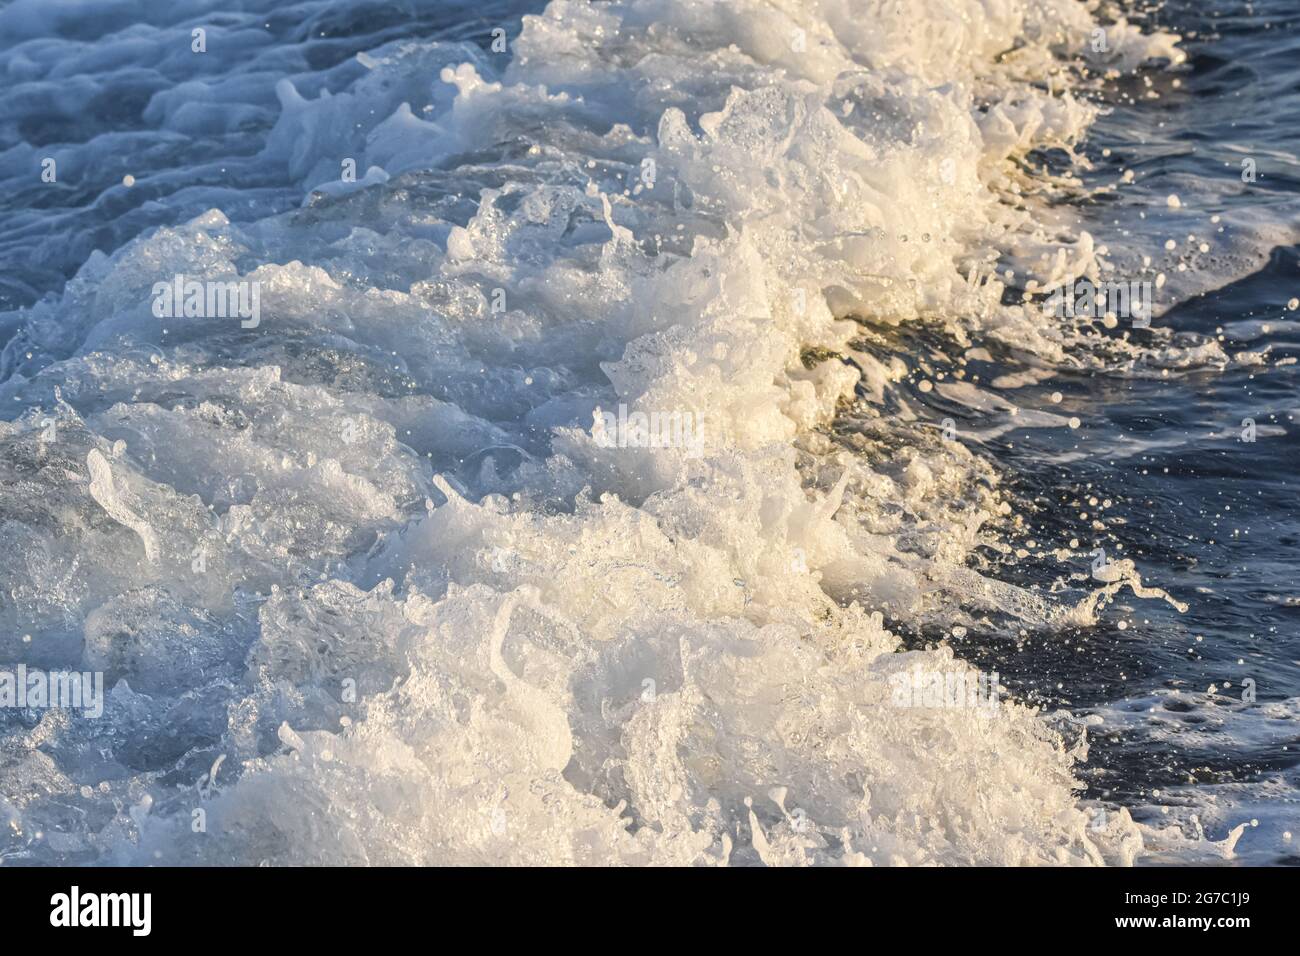 Seawater churned to a froth in the wake of a large ship. Late afternoon golden light. Stock Photo